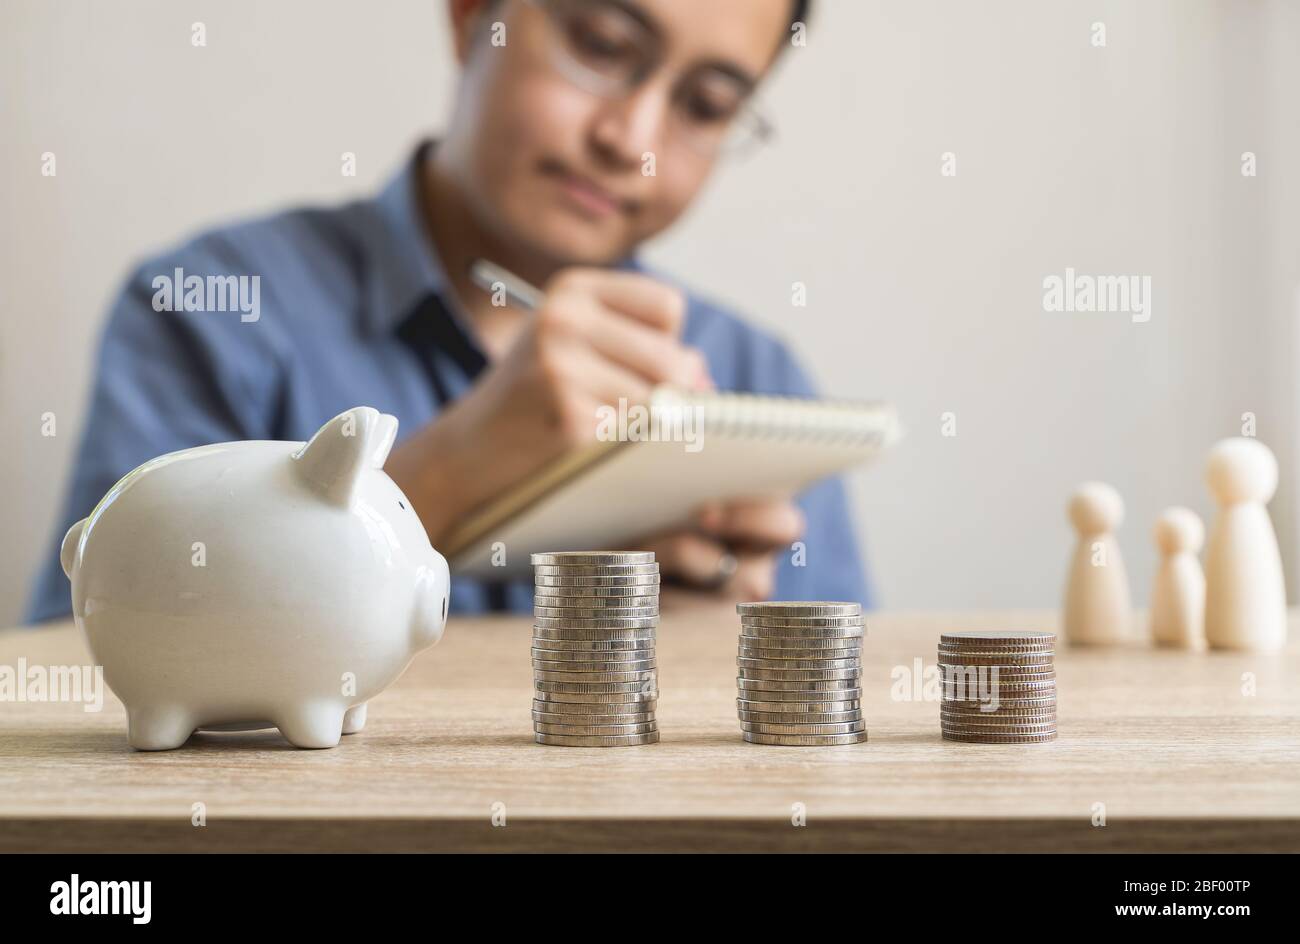 Money savings concepts  piggy bank and stack coins with blur man who's taking notes about saving money for family and family wooden dolls.on wooden ta Stock Photo